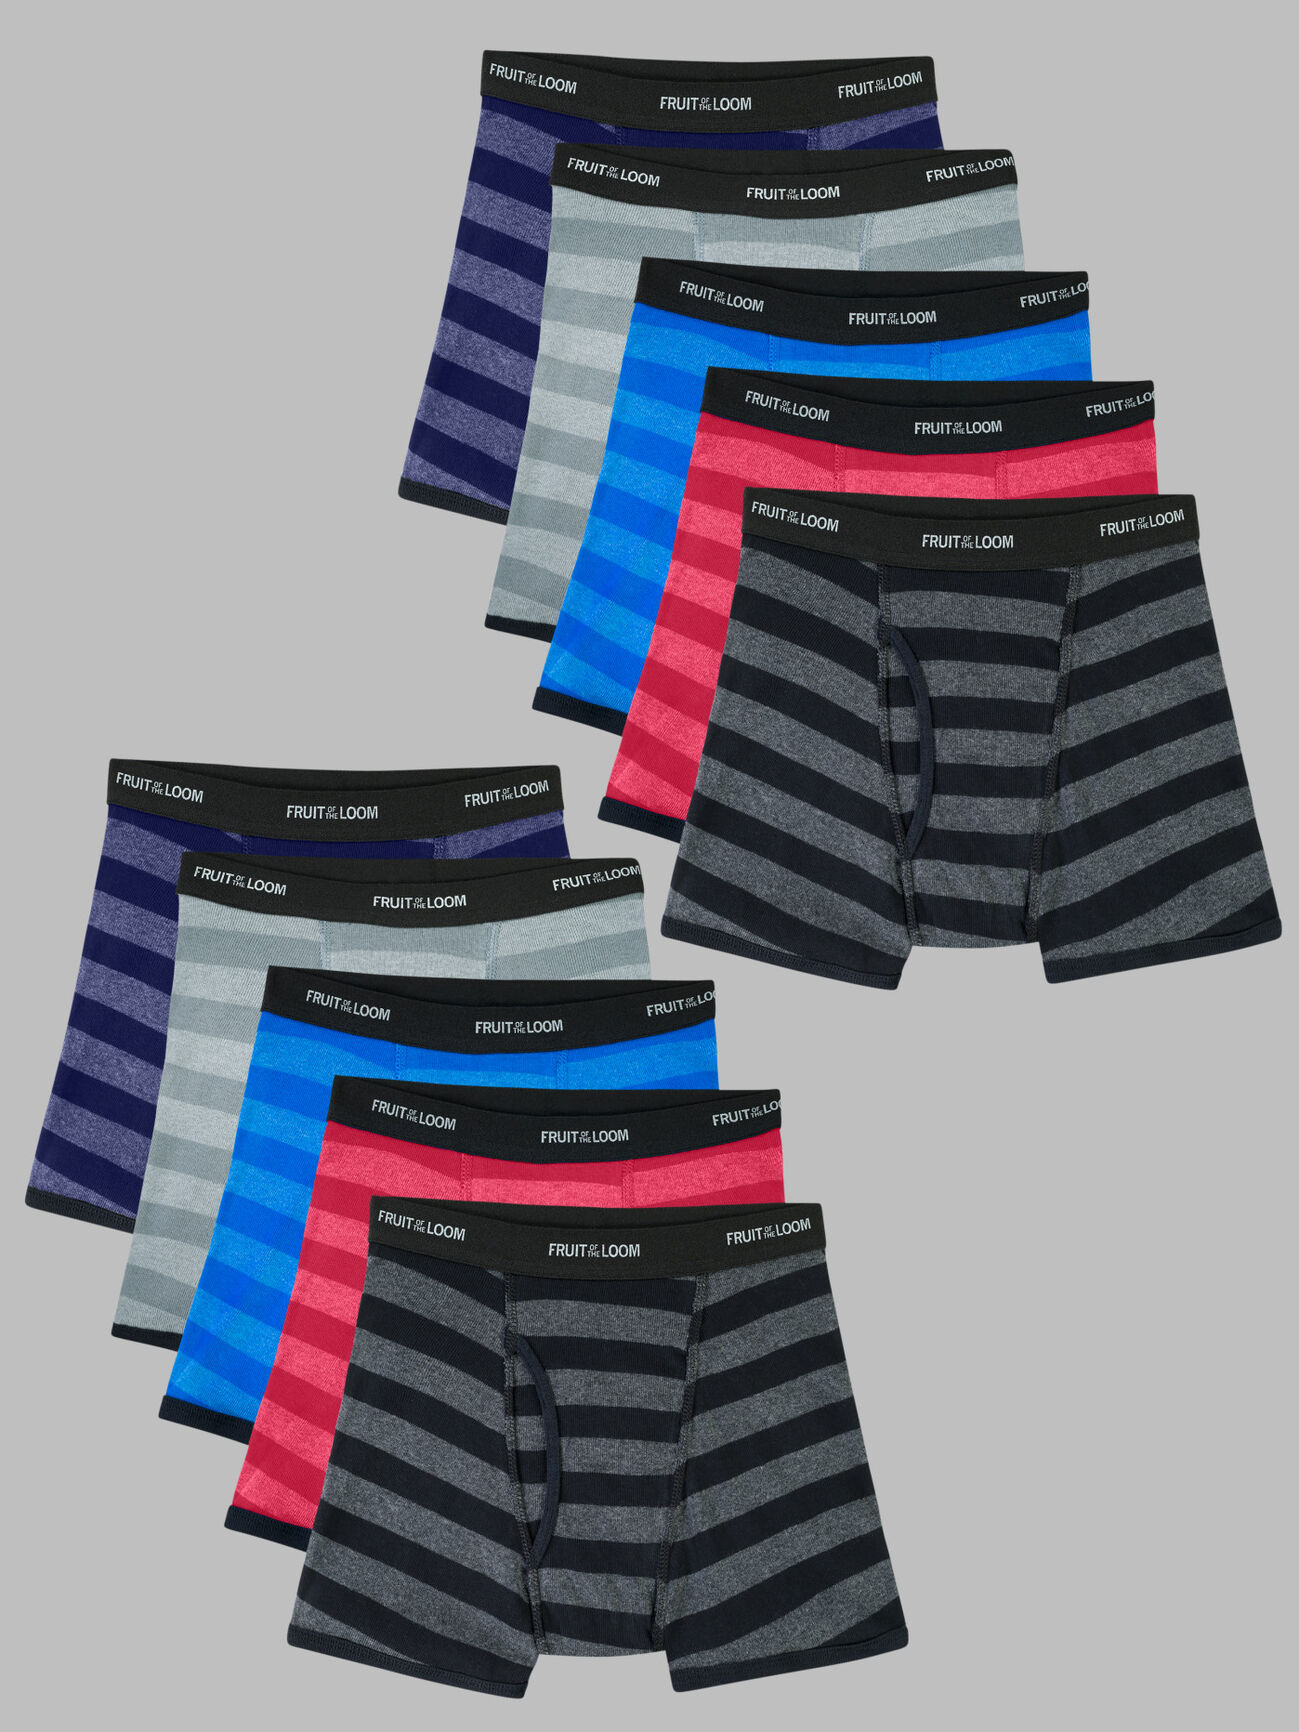 Toddler Boys Days of the Week Briefs Underwear (7 Pair Pack) by Fruit of the  Loom